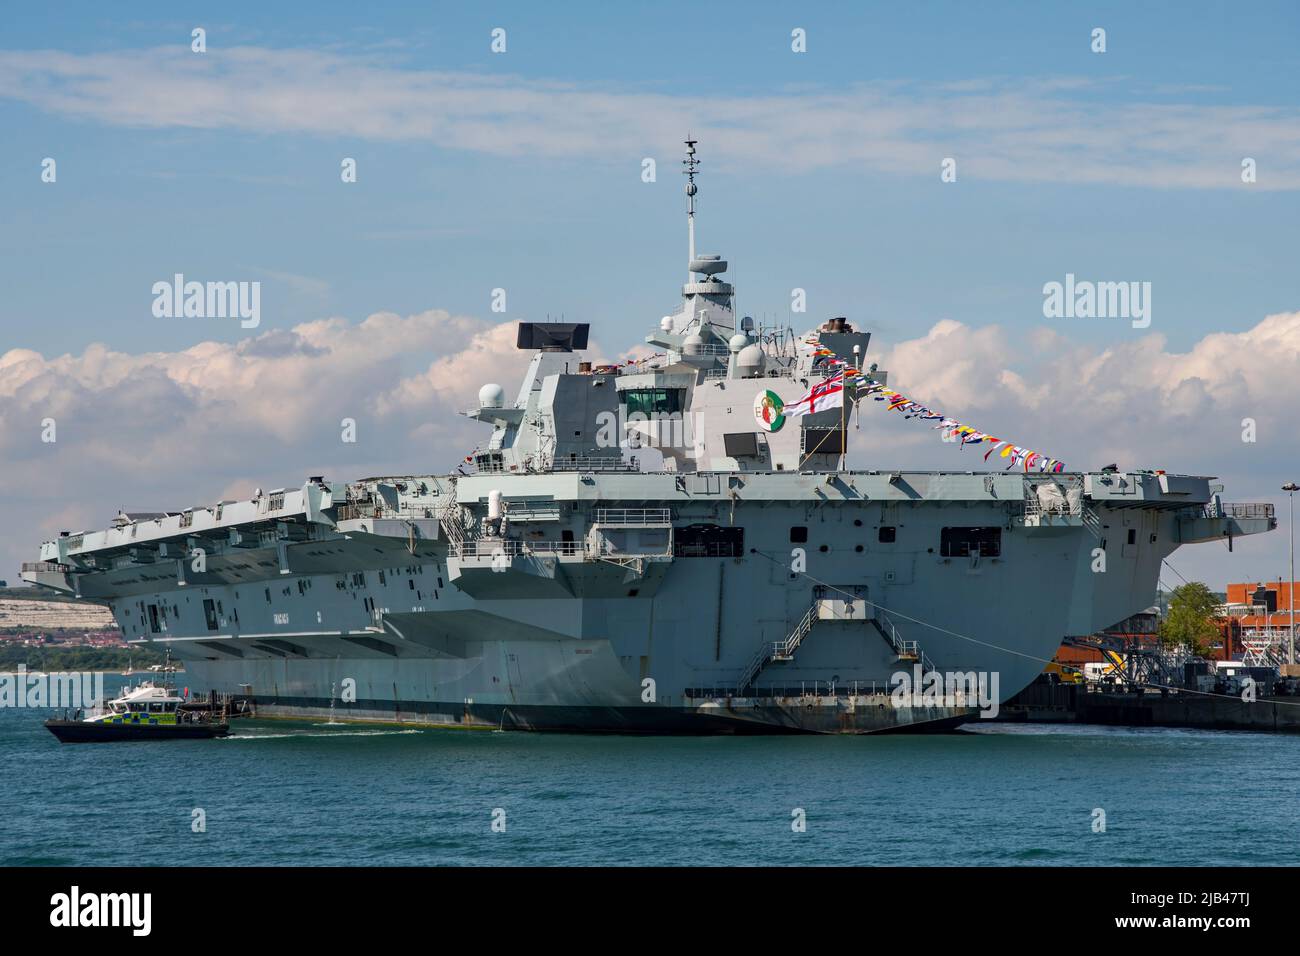 HMS Queen Elizabeth dressed overall for the Queen's Platinum Jubilee. Seen alongside at Portsmouth Naval Base, UK on Coronation Day the 2nd June 2022. Stock Photo